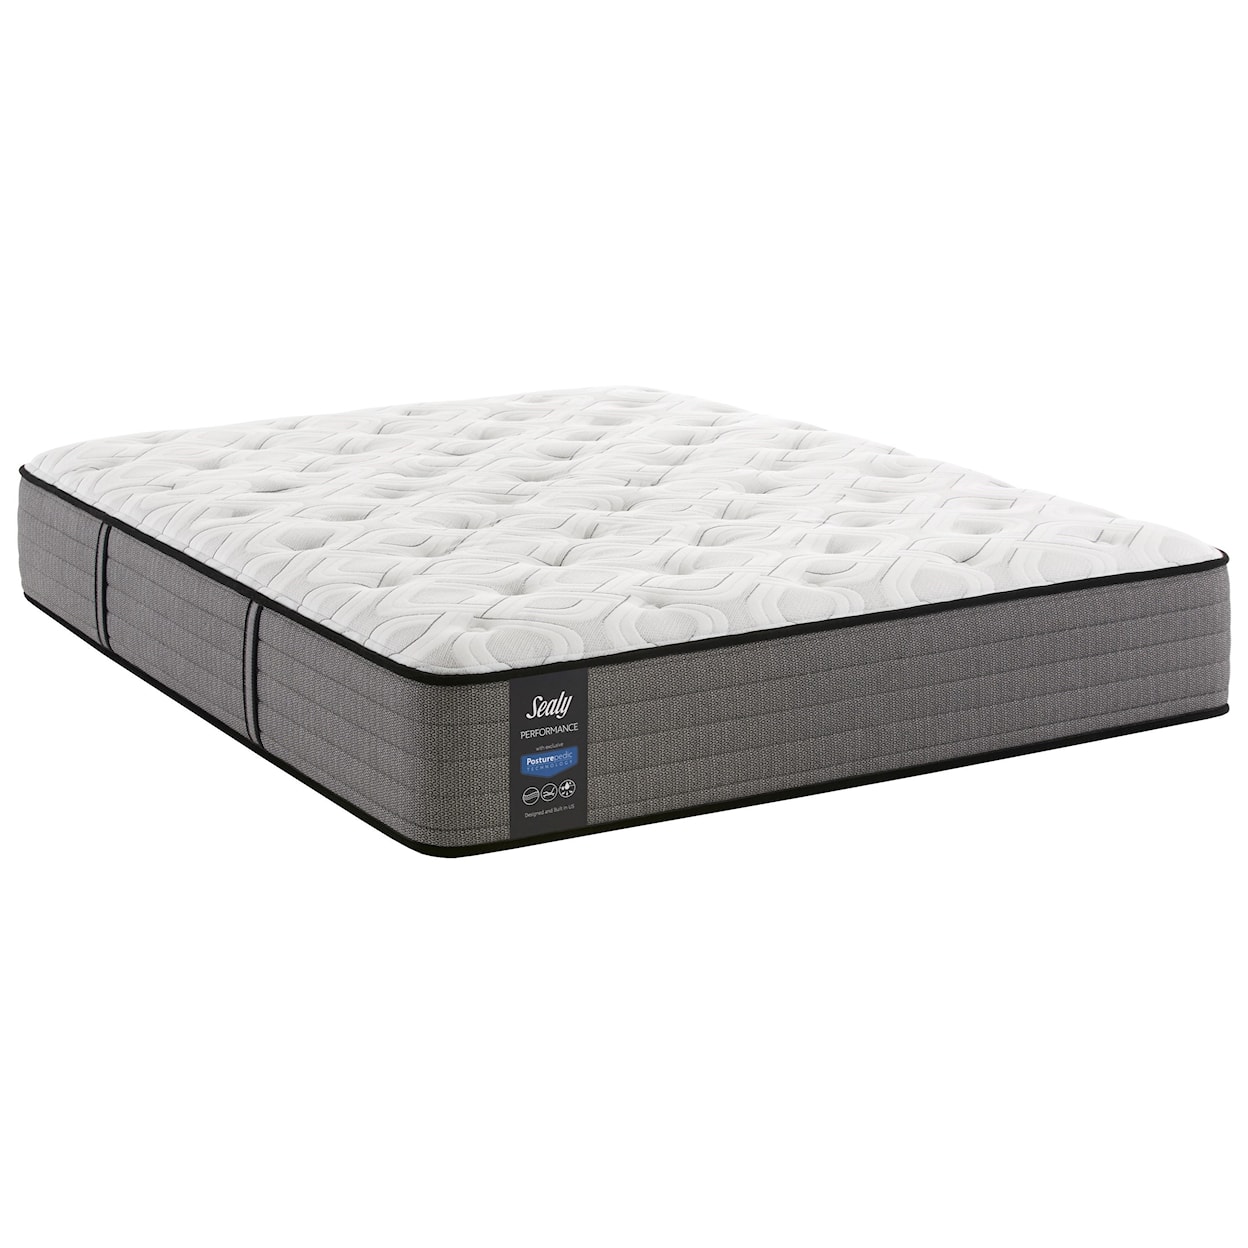 Sealy Serious Firm King 11" Firm Encased Coil Mattress